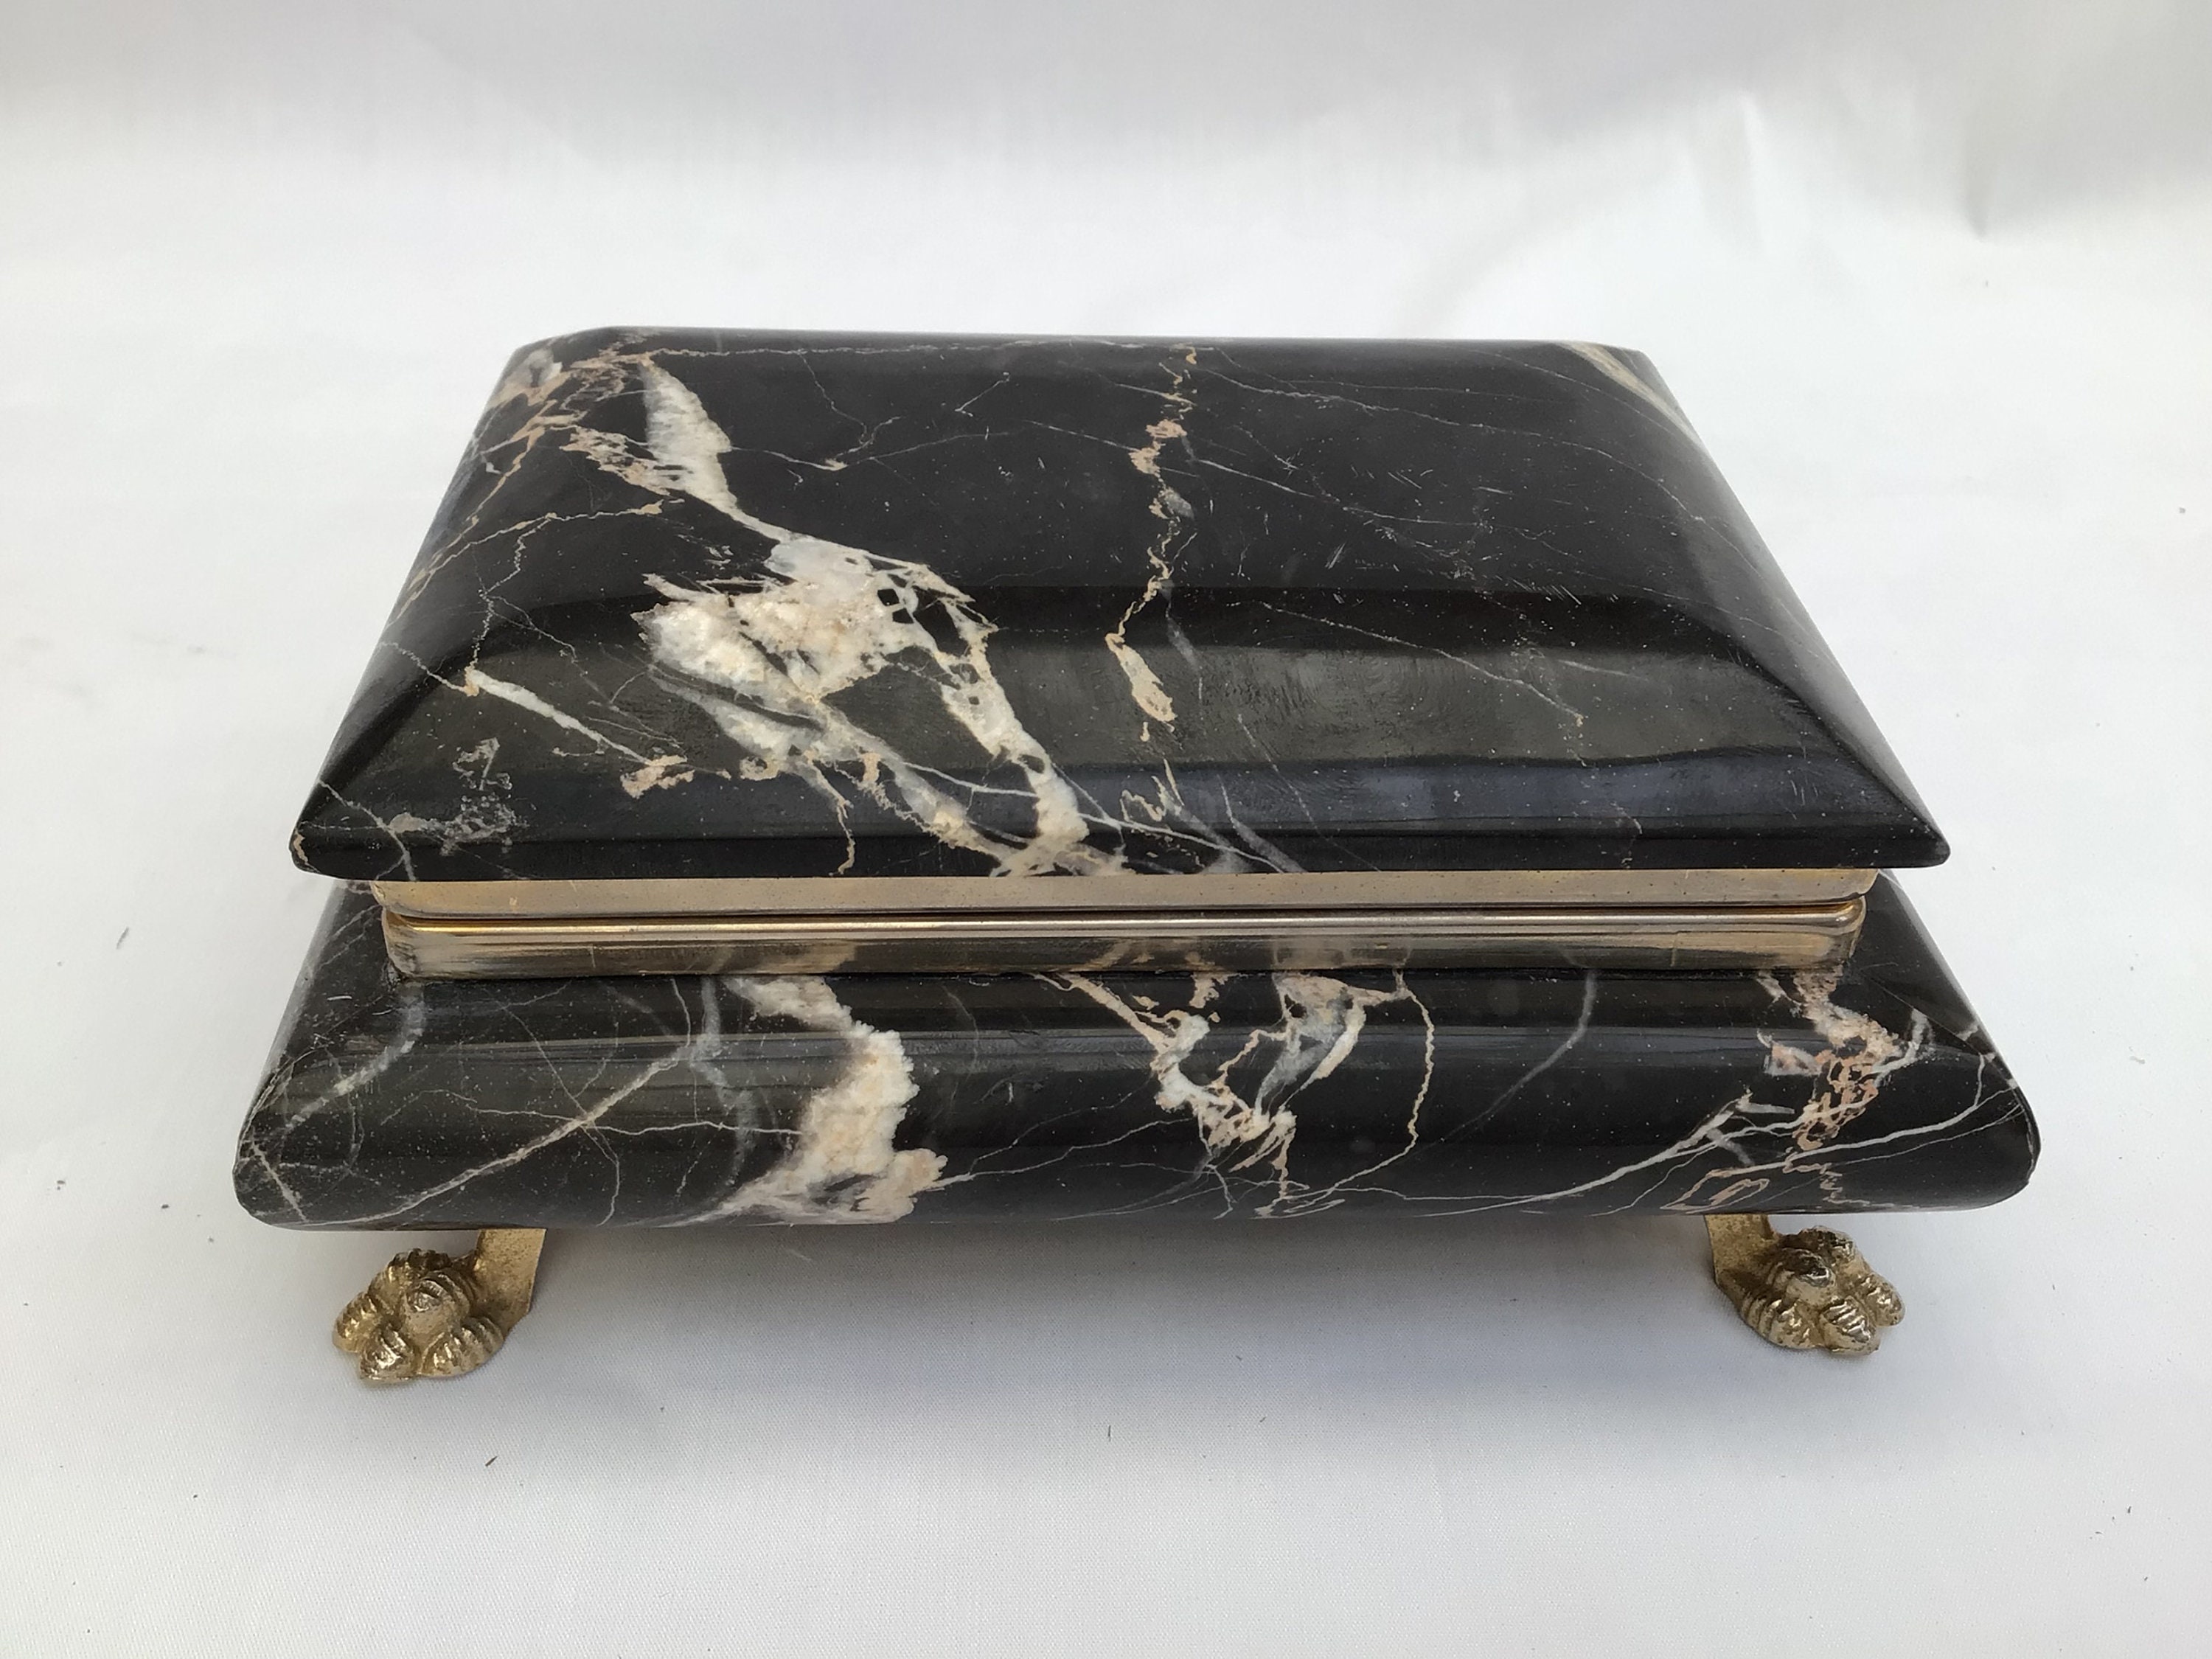 Marble Container Box Sizes 1.5 to 5inches, Handmade Indian Art